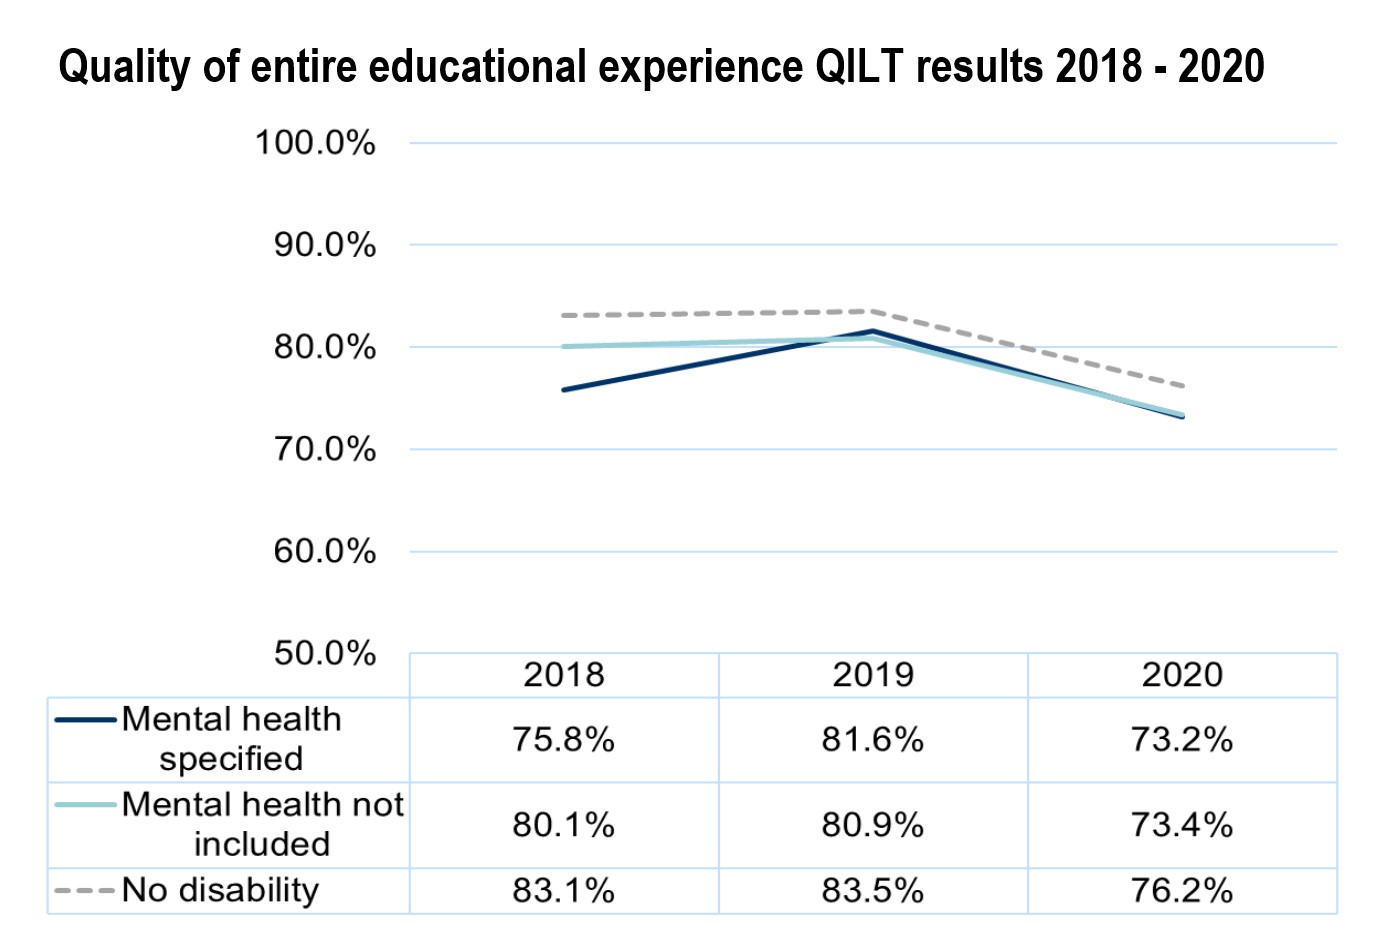 QILT survey for entire educational experience for students with and without mental health conditions from 2018 - 2020.